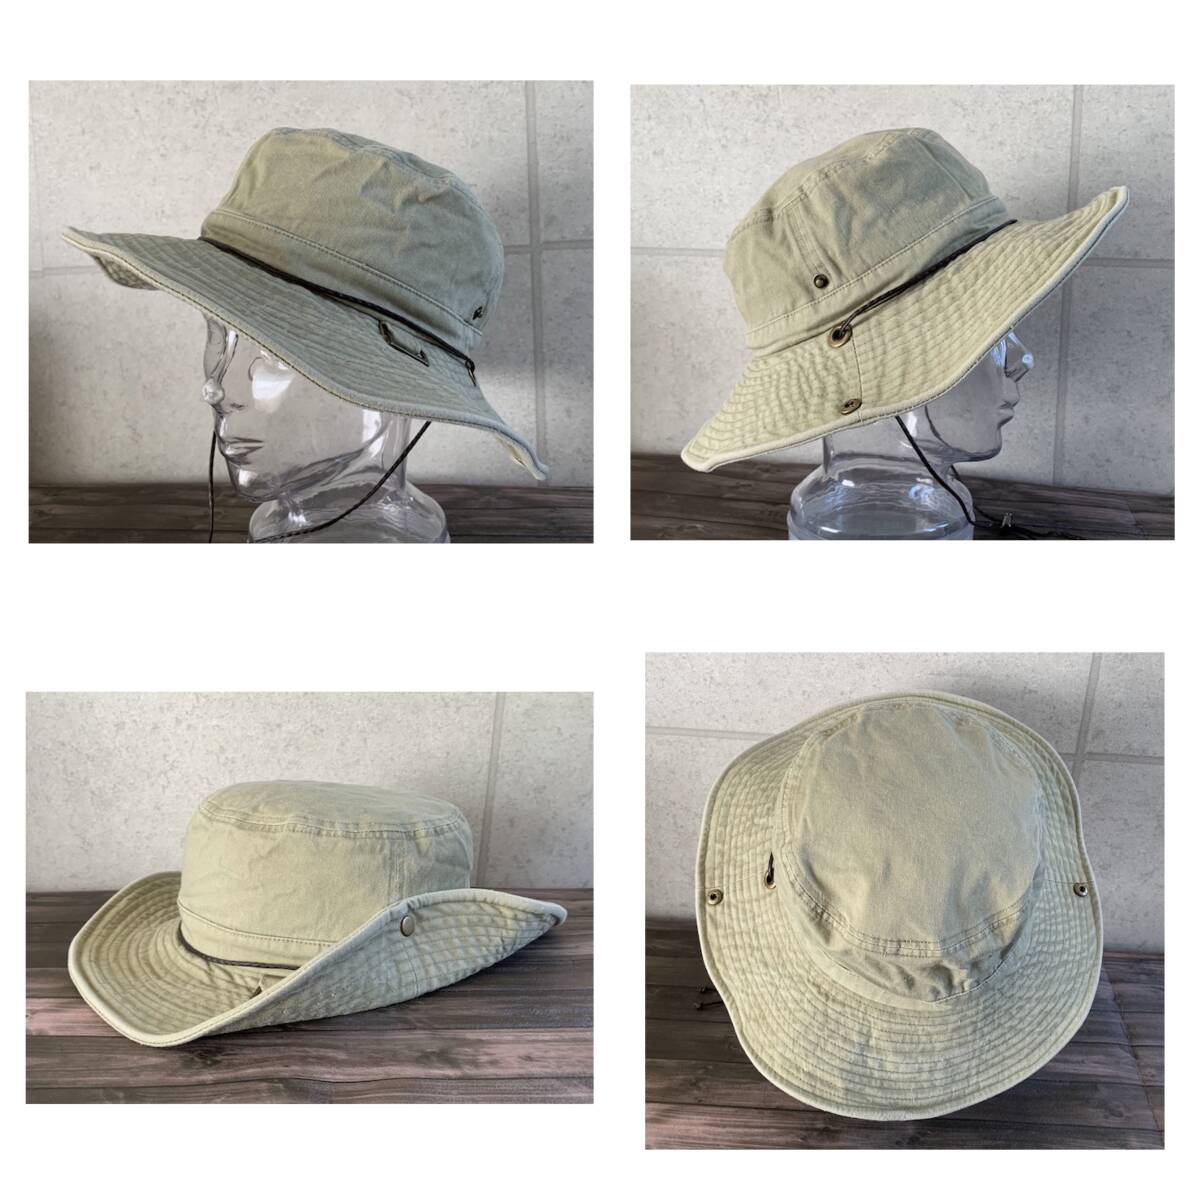  hat XL BIG large size safari hat woshu wide‐brimmed damage sunshade camp outdoor size adjustment man and woman use beige 